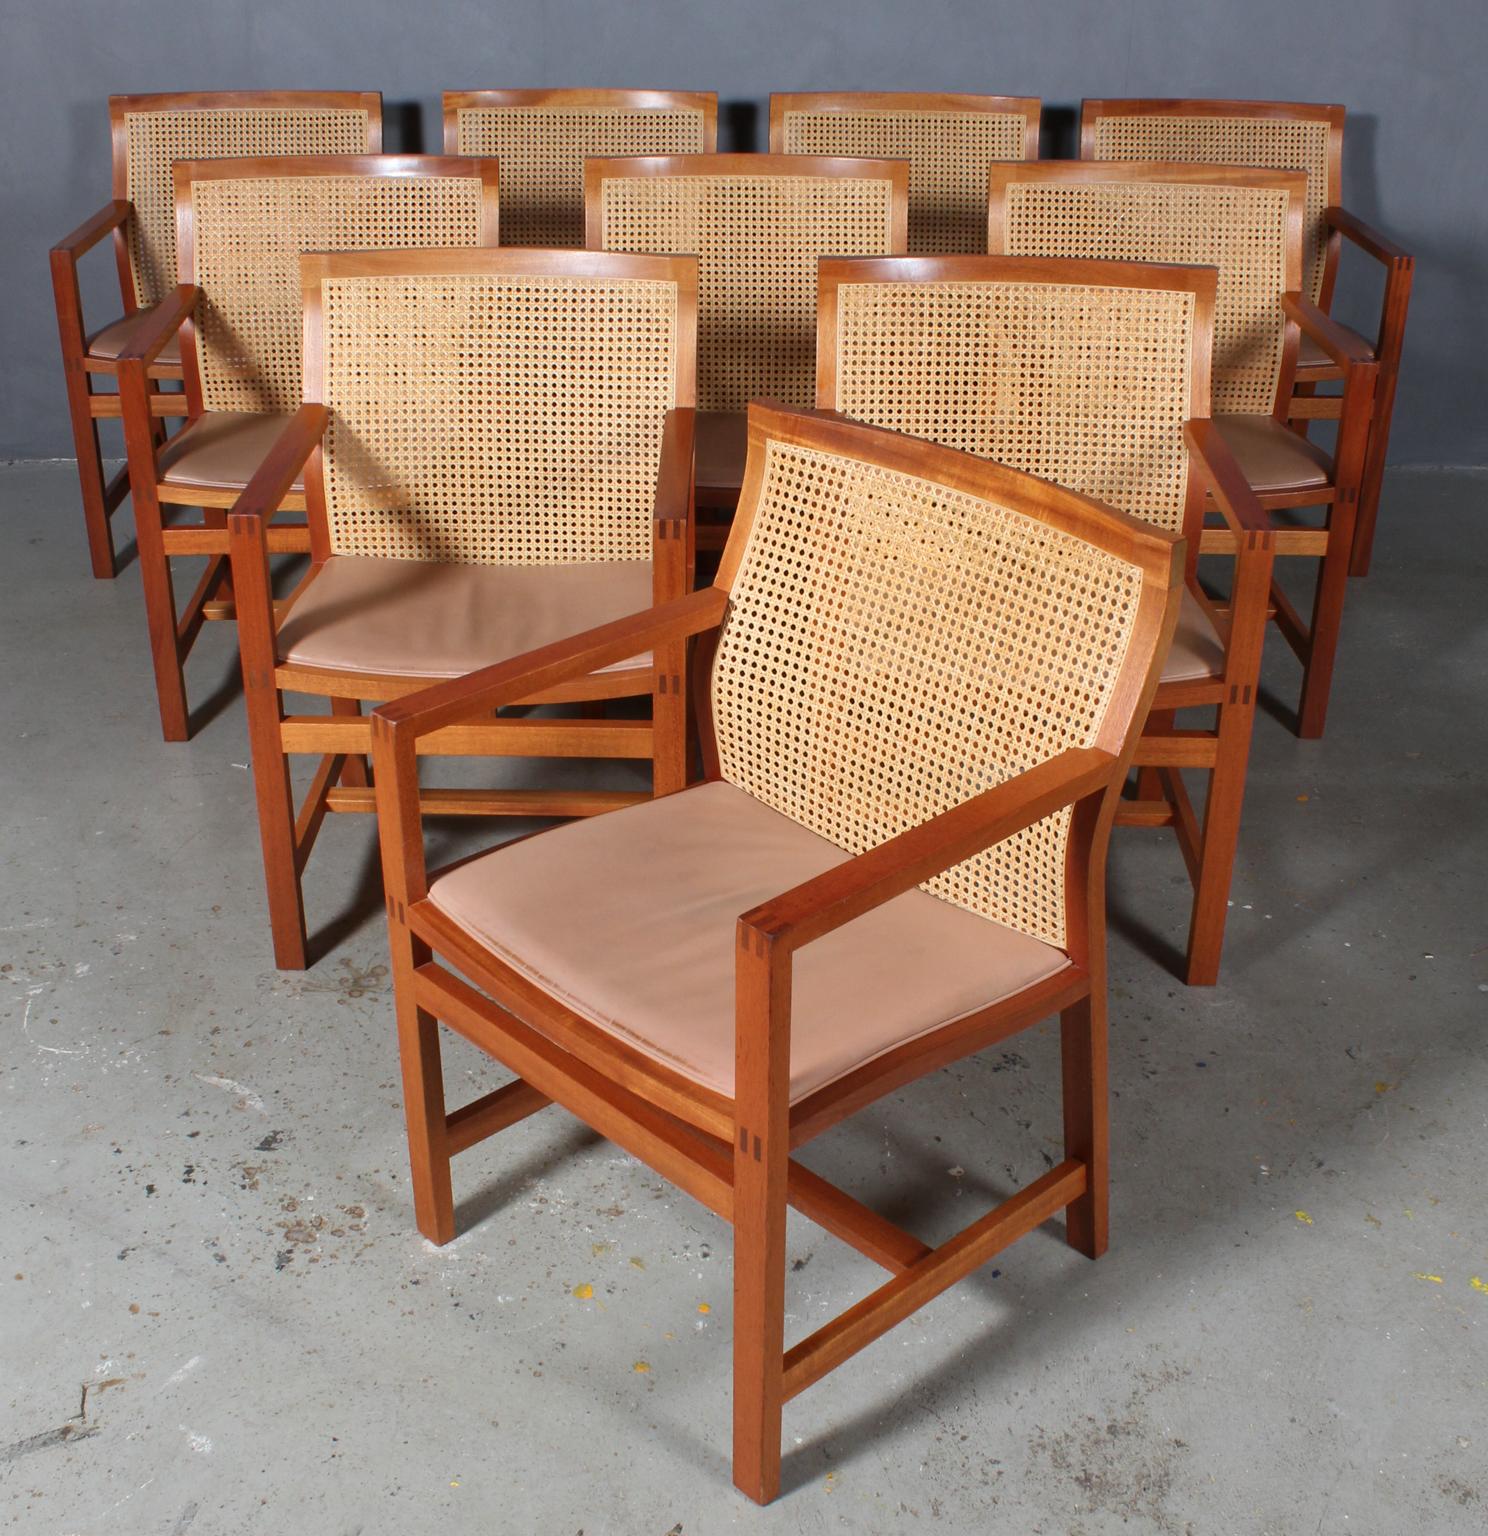 Rud Thygesen & Johnny Sørensen set of ten armchairs with frame of solid mahogany.

Cane in the back original leather aniline upholstery on seat.

From 